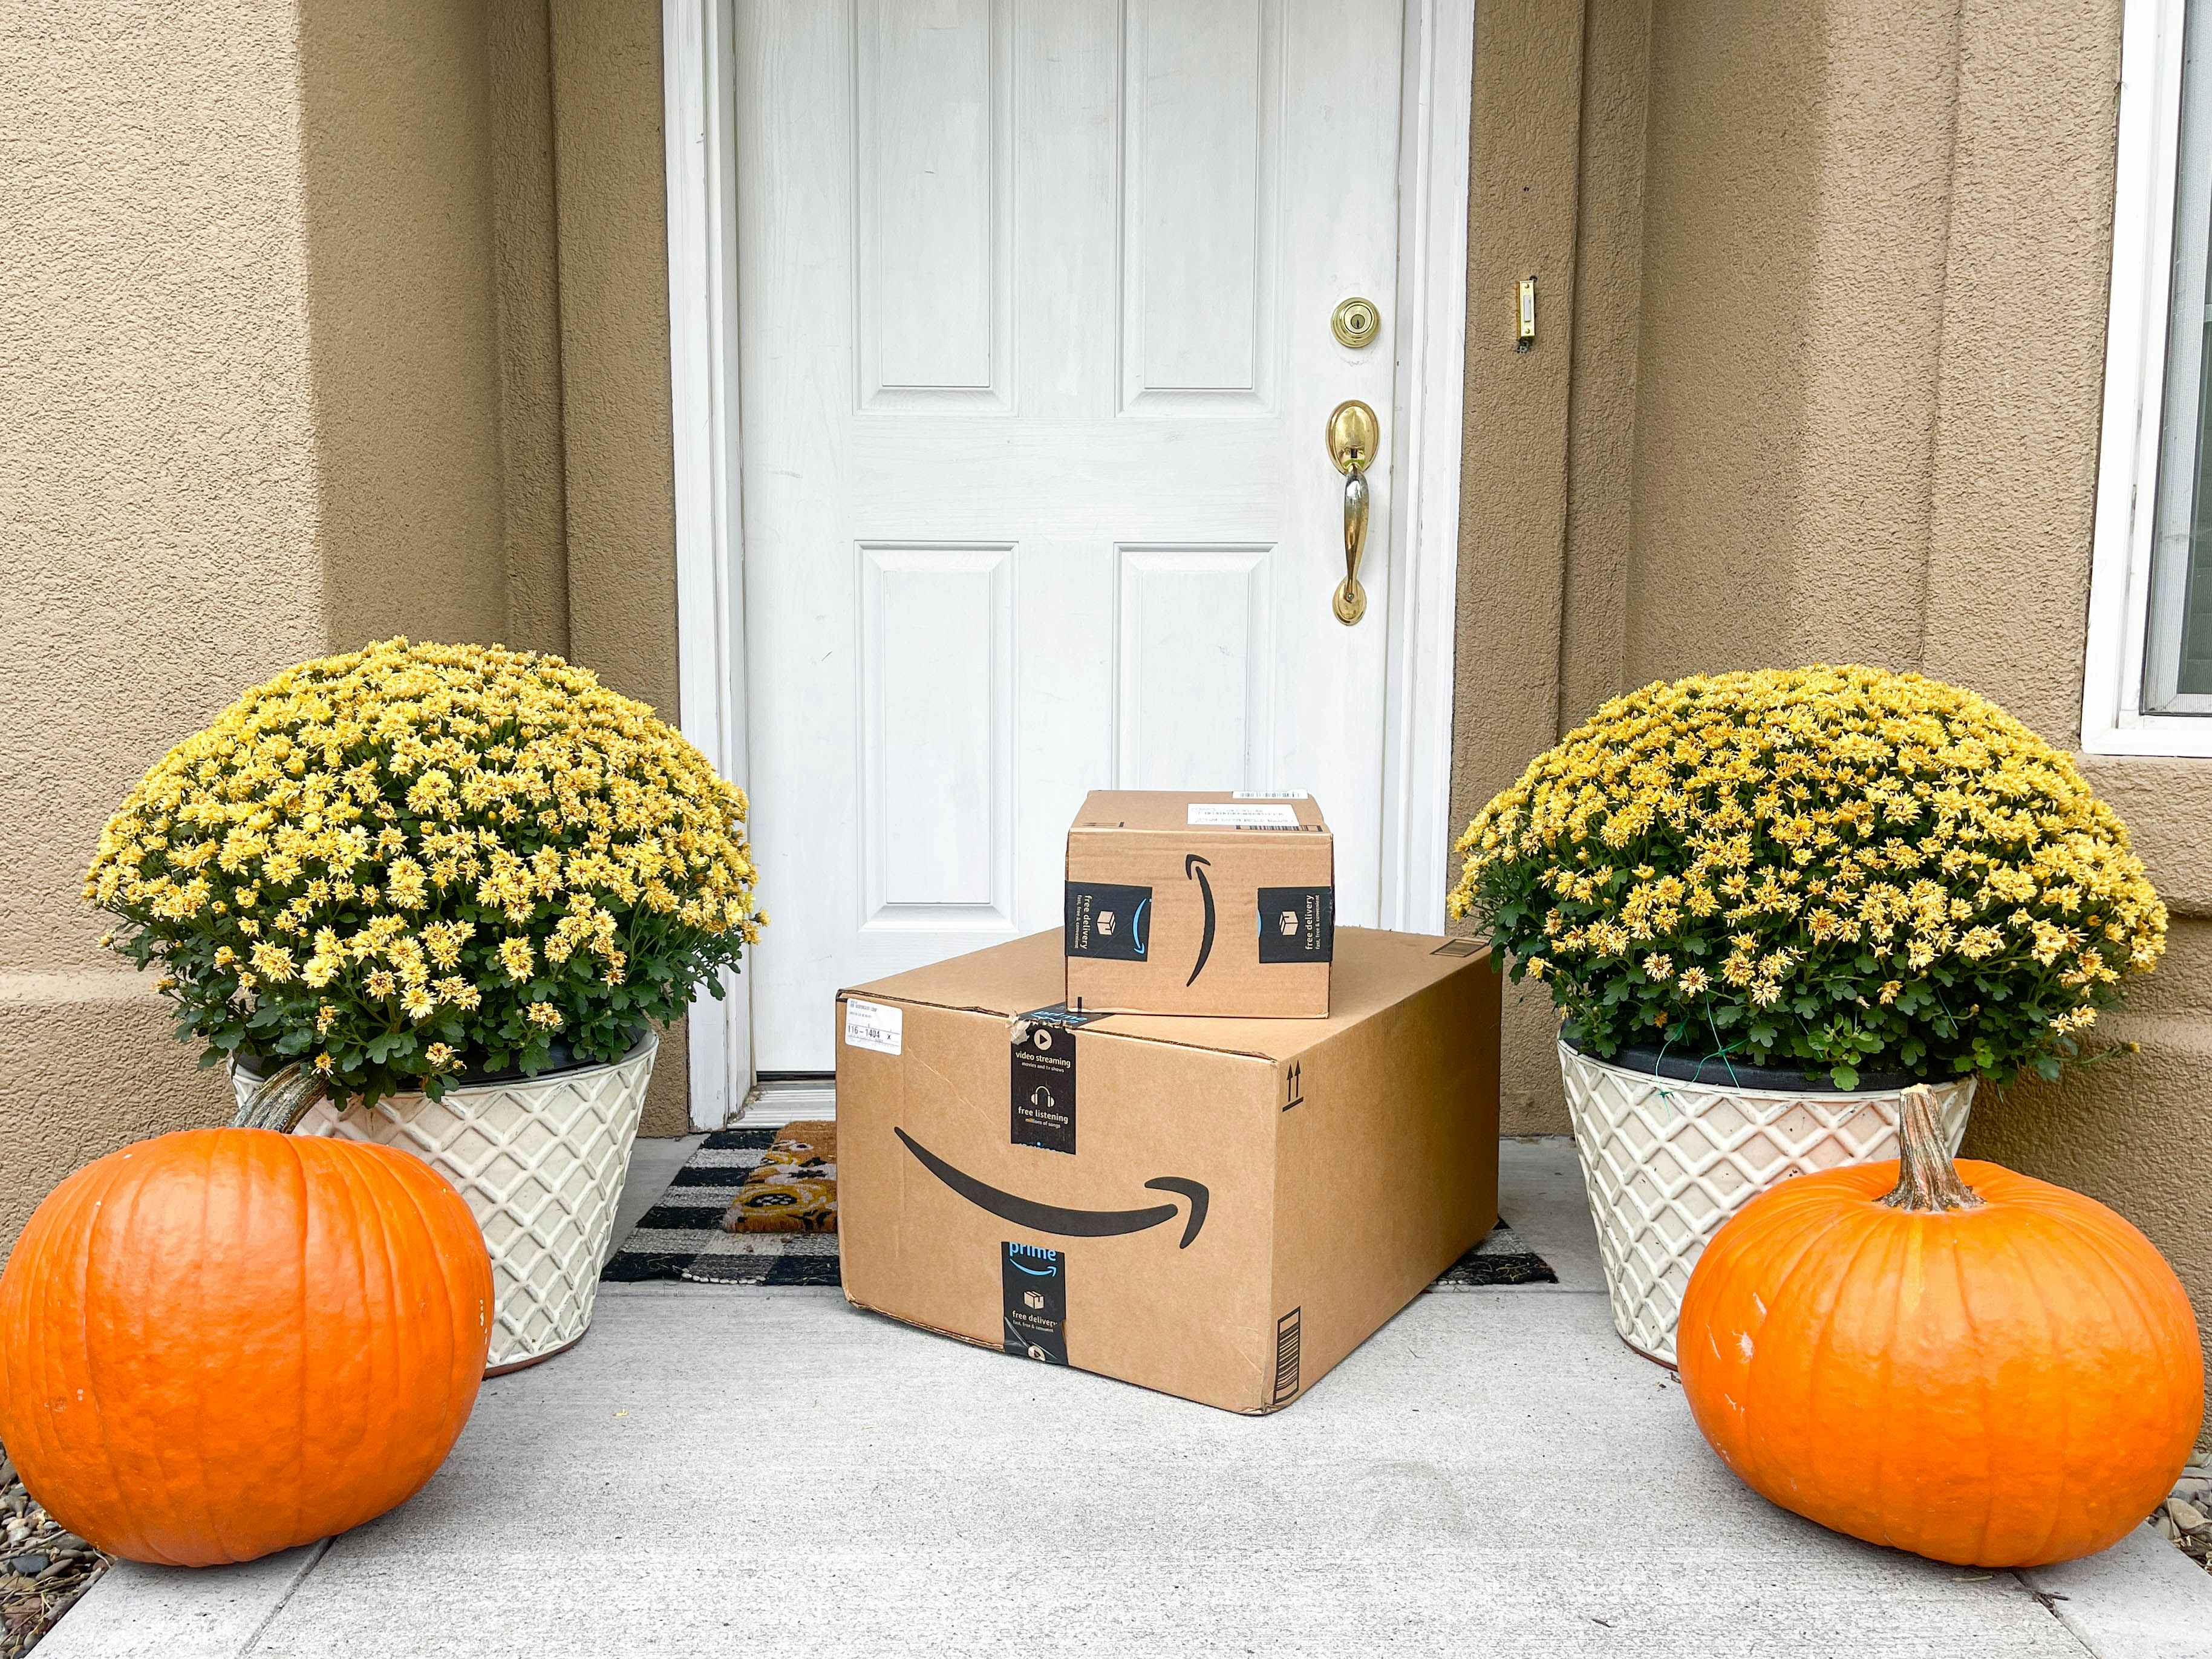 Amazon boxes on a doorstep with fall mums and pumpkins on each side